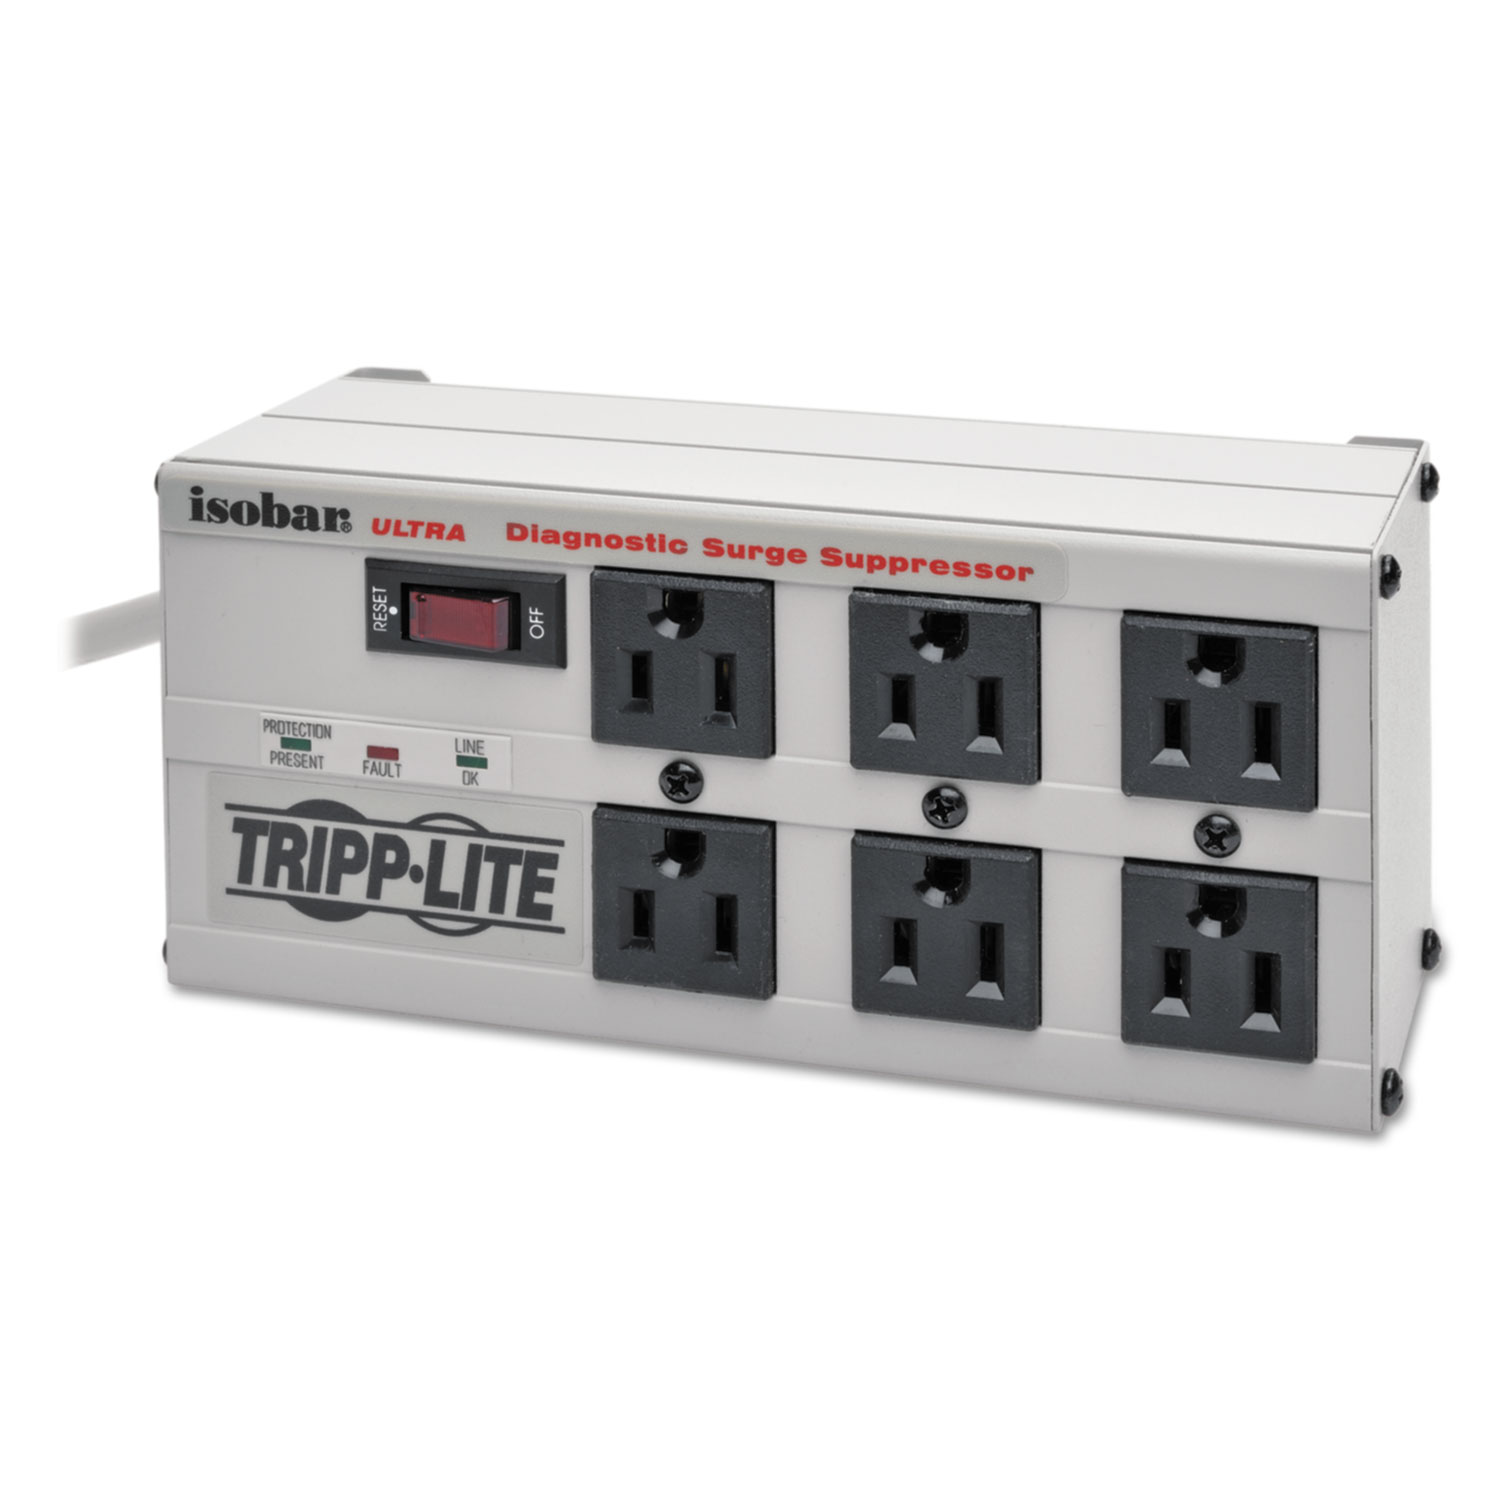  Tripp Lite ISOBAR6 ULTRA Isobar Surge Protector, 6 Outlets, 6 ft. Cord, 3330 Joules, Metal Housing (TRPISOBAR6ULTRA) 